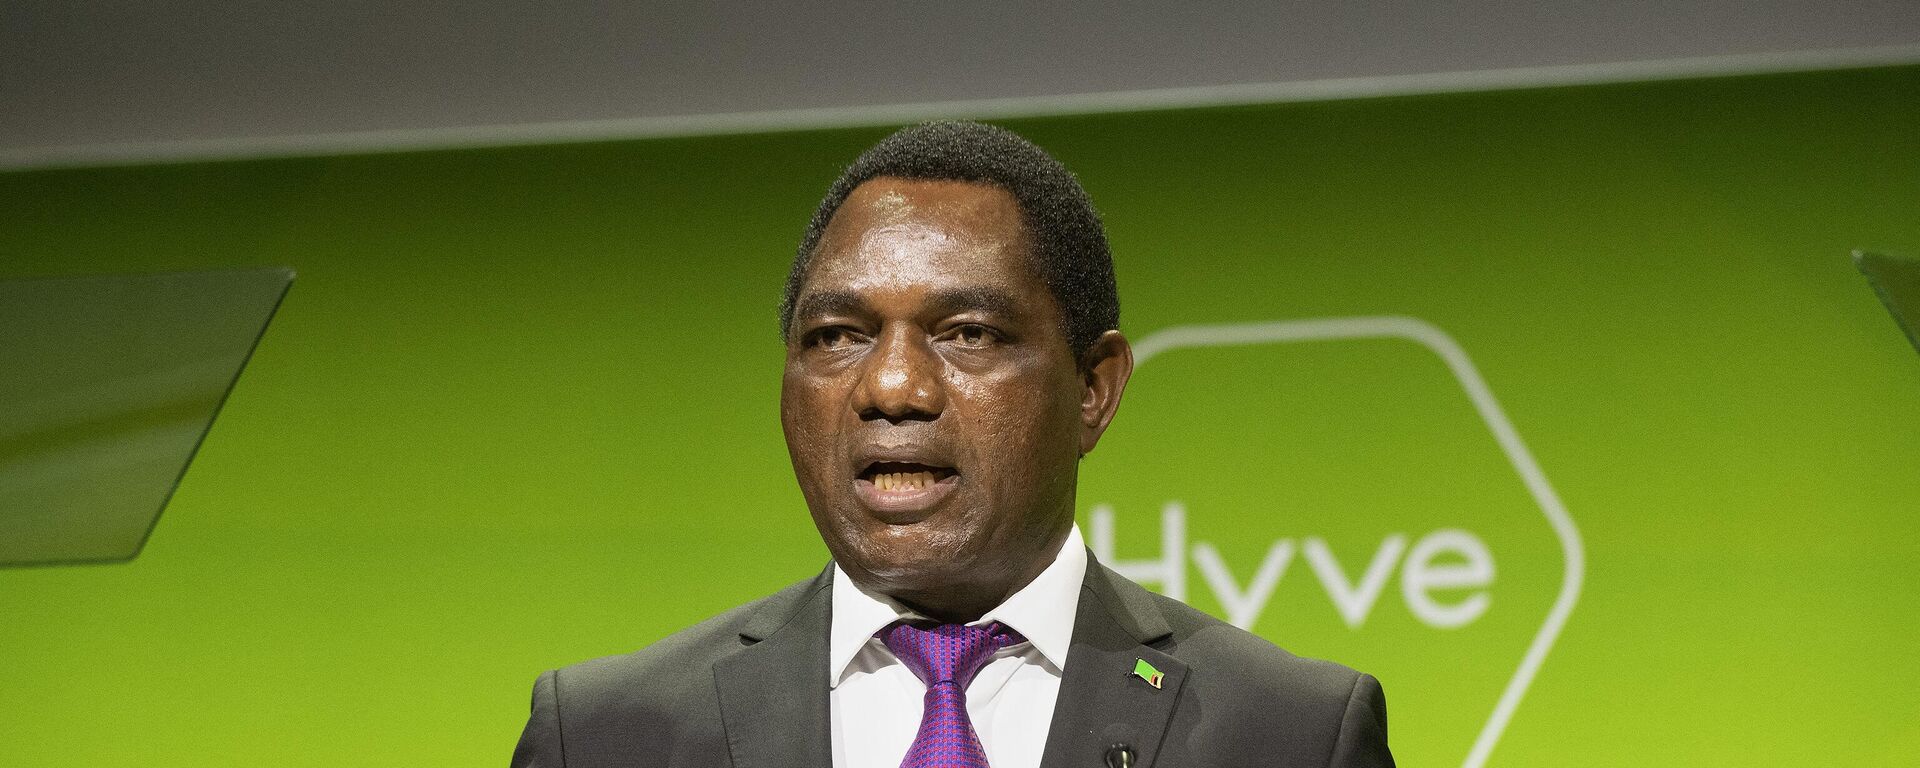 The President of Zambia Hakainde Hichilema speaks at the Mining Indaba in Cape Town on May 9, 2022. - Sputnik International, 1920, 17.02.2023